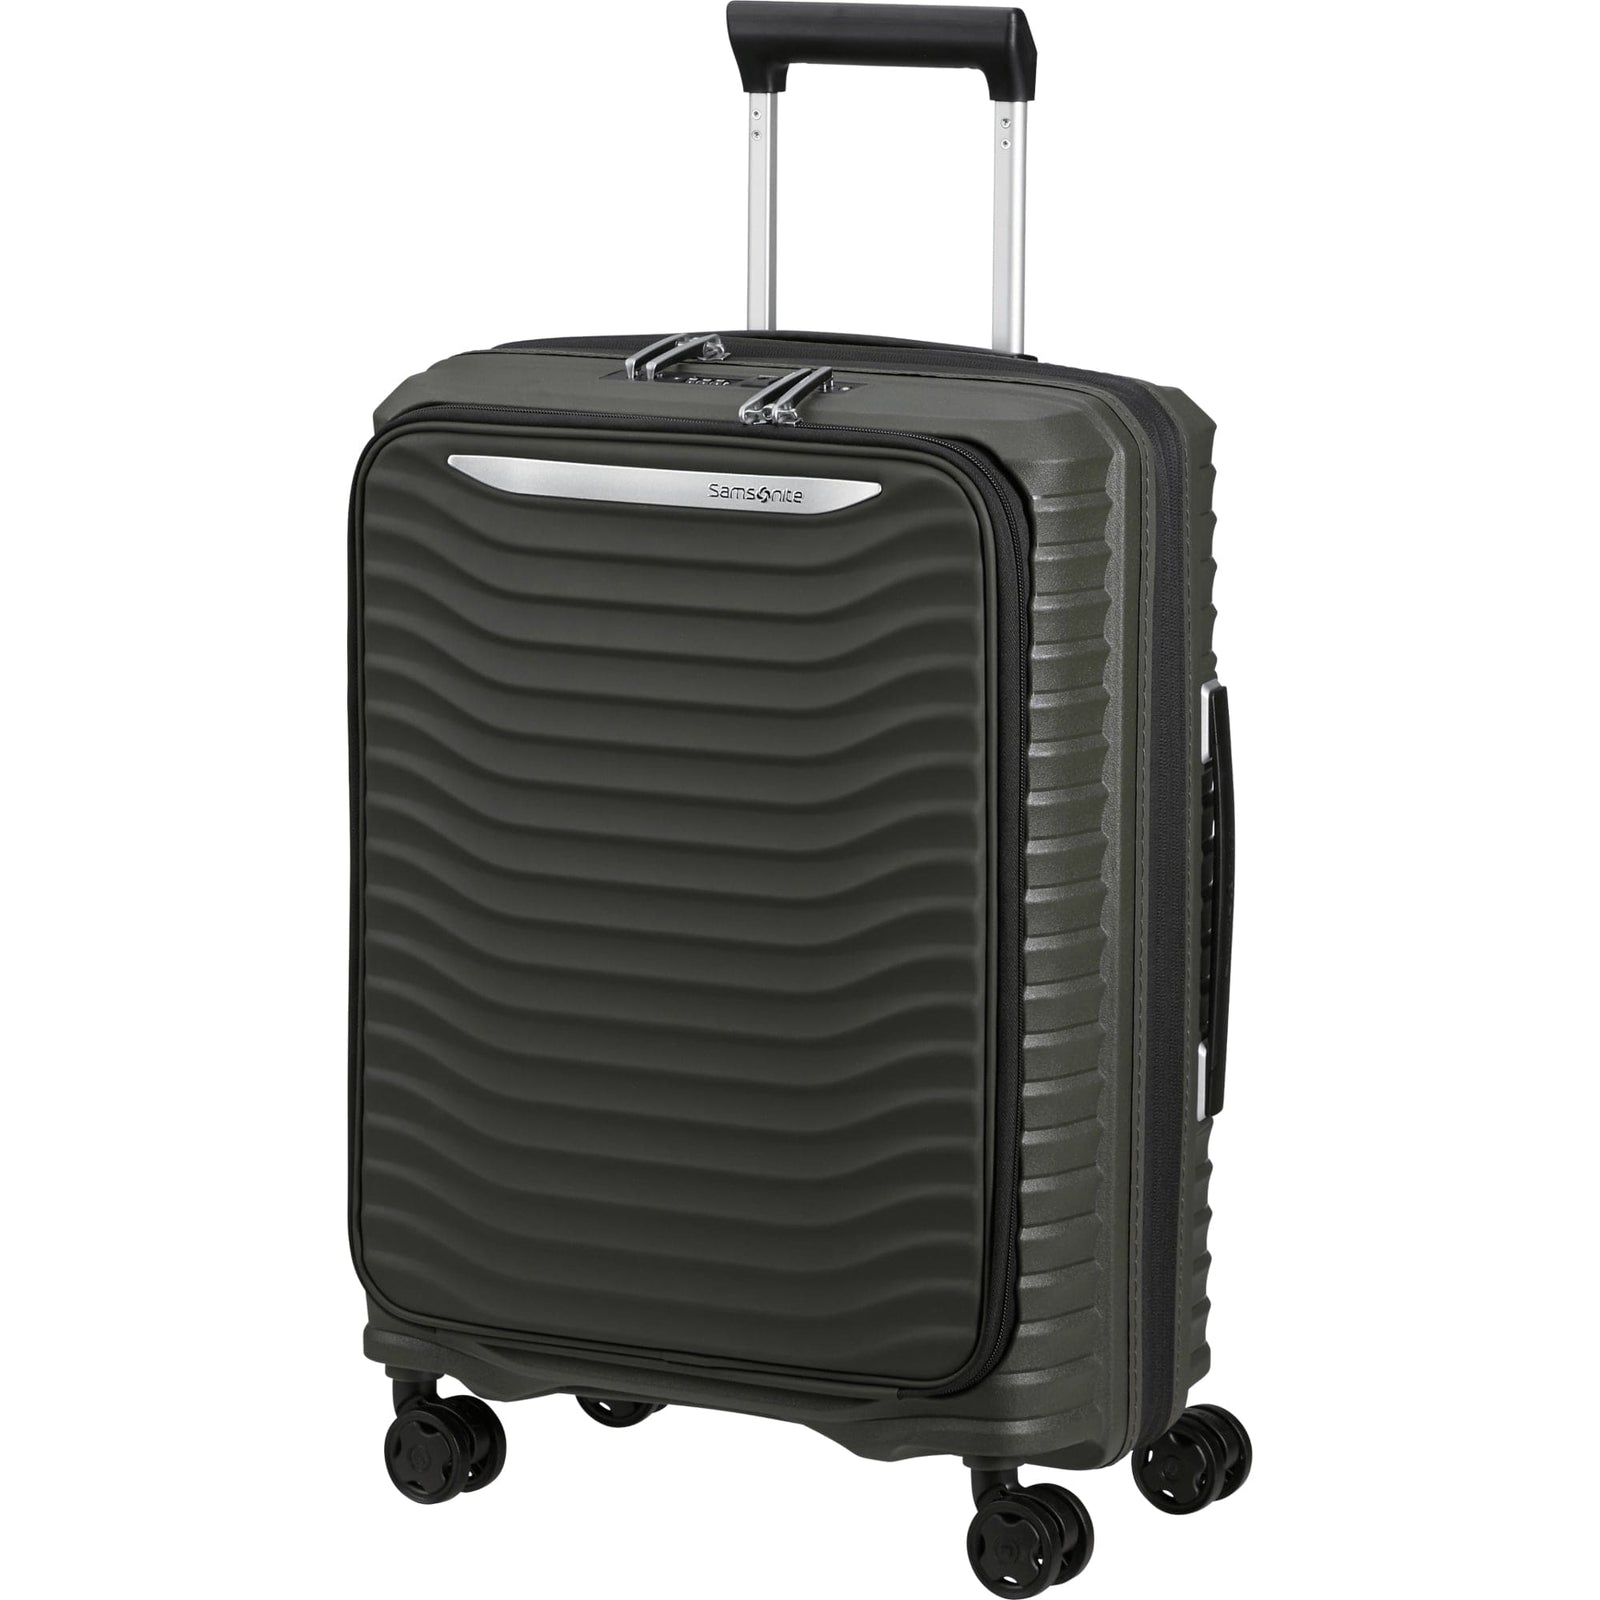 Samsonite Upscape Spinner expandable (4 wheels) 55cm in Climbing Ivy